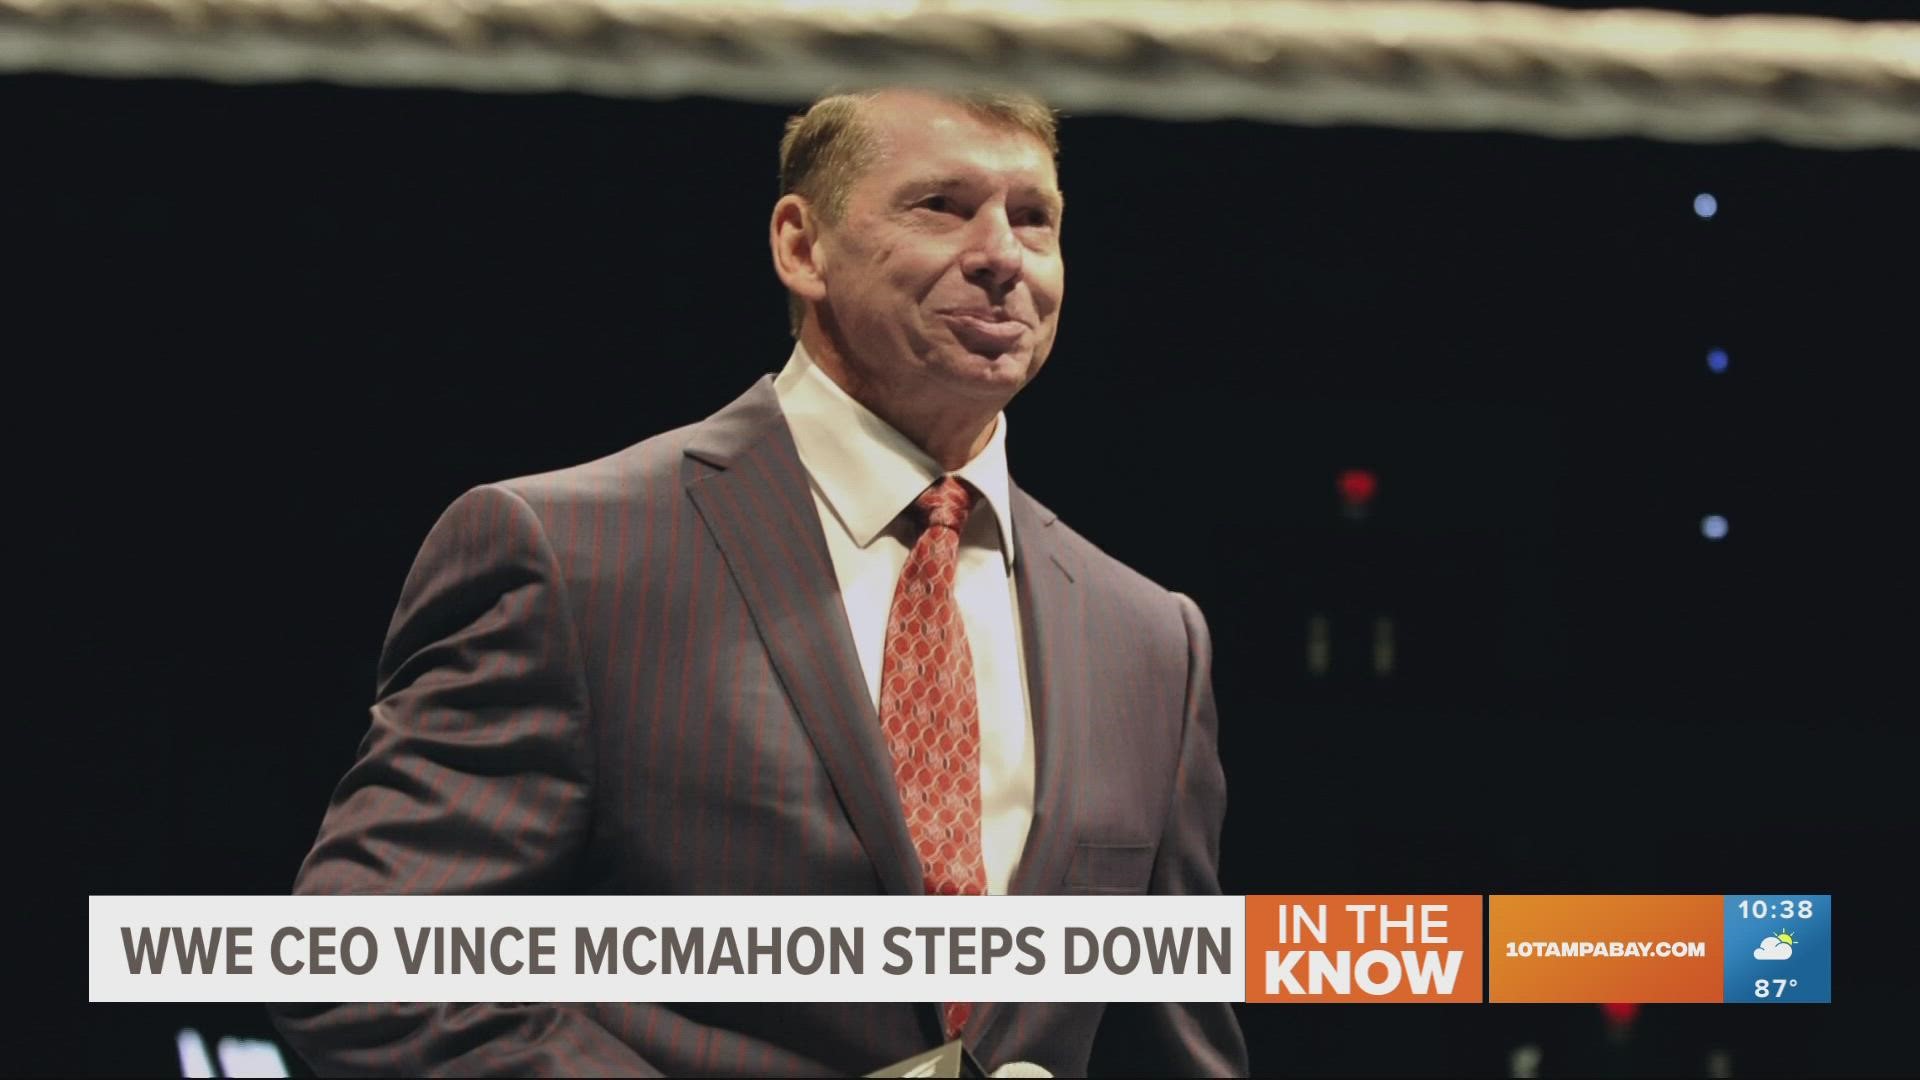 The Wall Street Journal reported WWE's board uncovered nondisclosure agreements involving claims by ex-WWE employees of misconduct by McMahon and another exec.